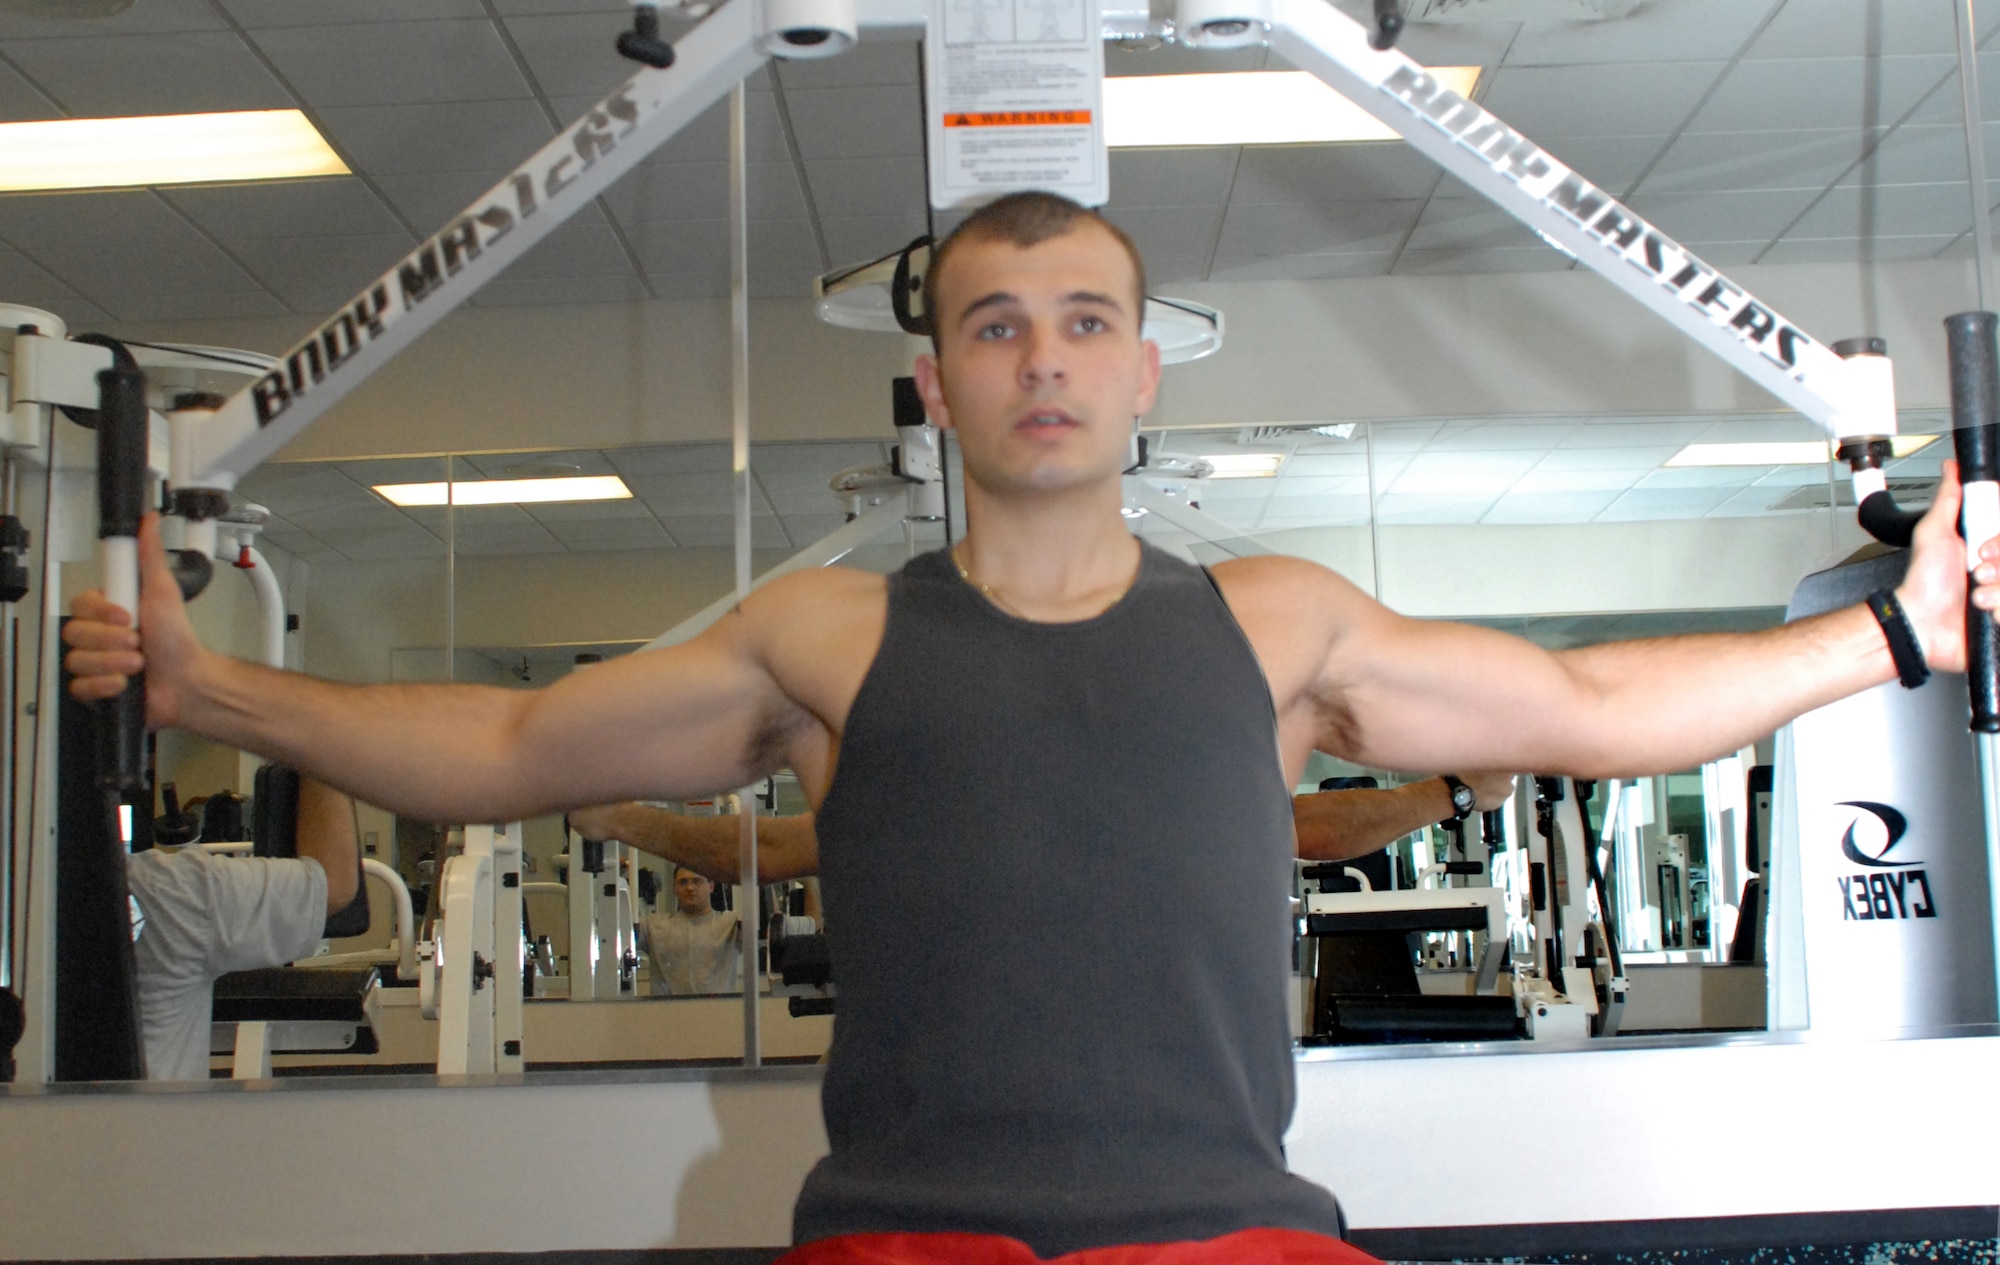 Senior Airman Alexandru Stoica, 436th Services Squadron, works out his upper body at the Dover Fitness Center.  Airman Stoica recently scored a perfect 100 on the PT test.  (U.S. Air Force photo/Staff Sgt. Chad Padgett)